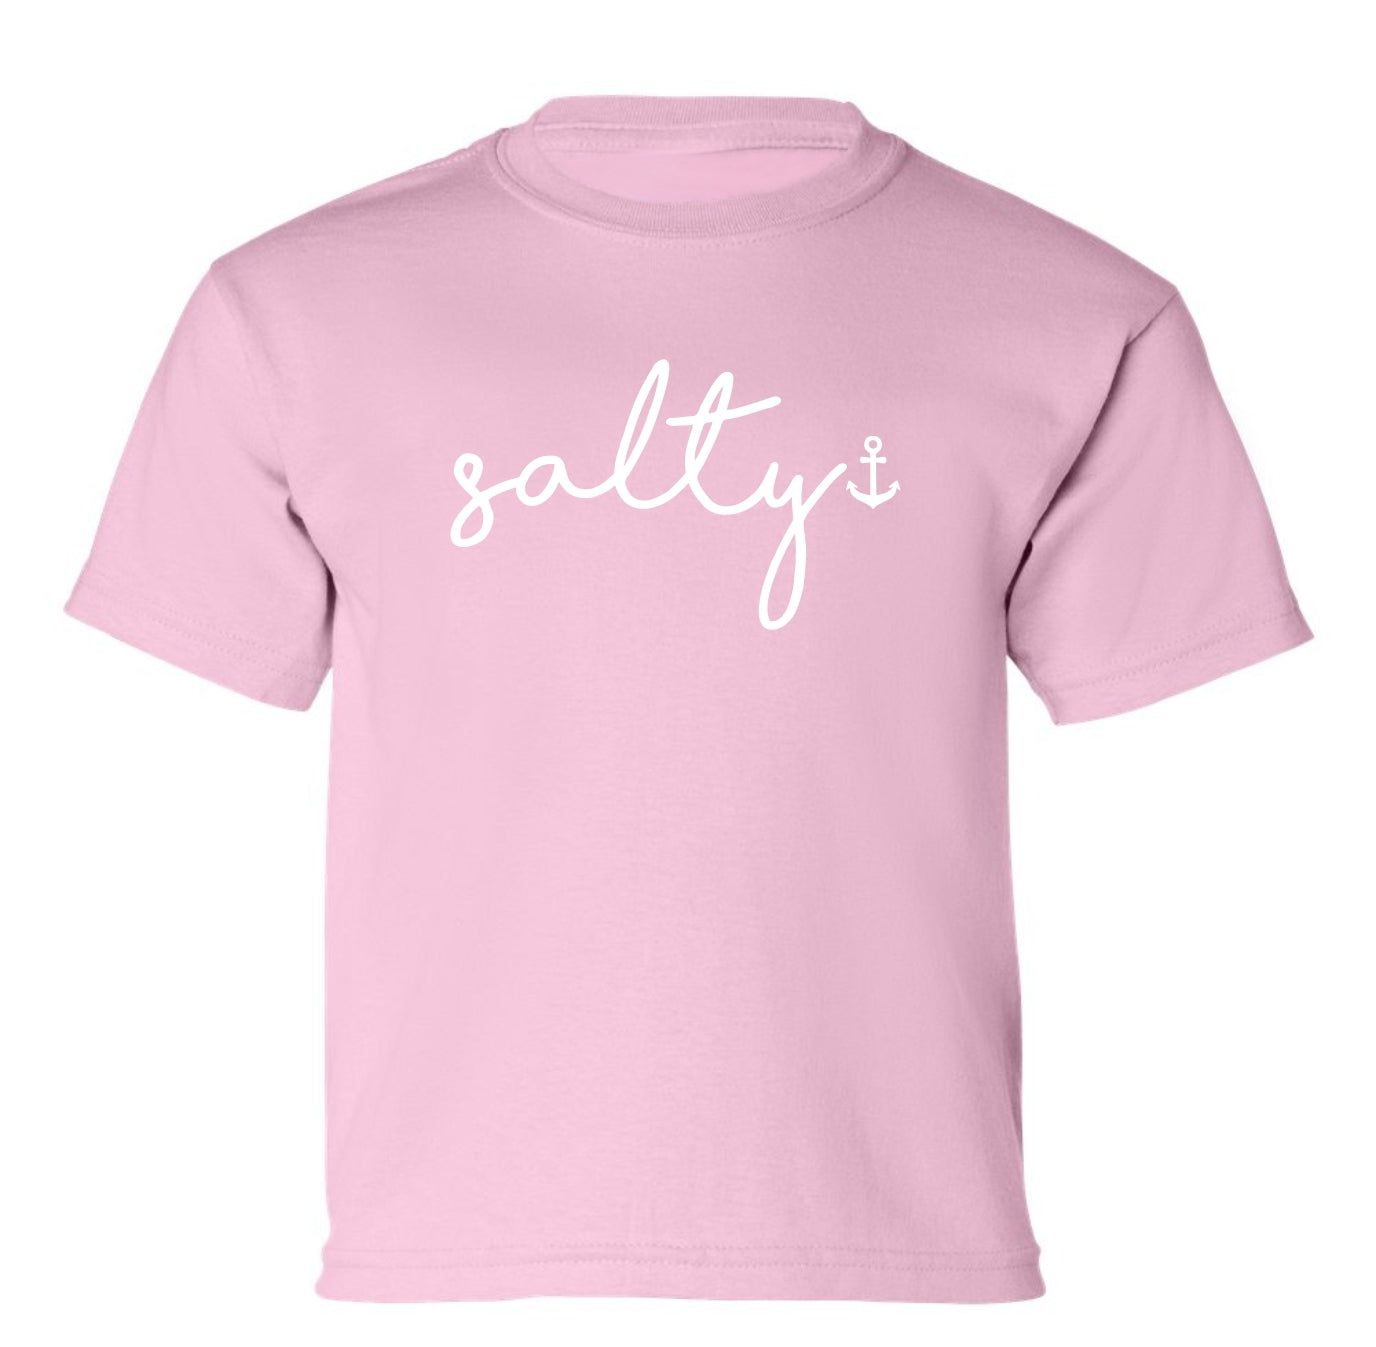 "Salty" Toddler/Youth T-Shirt